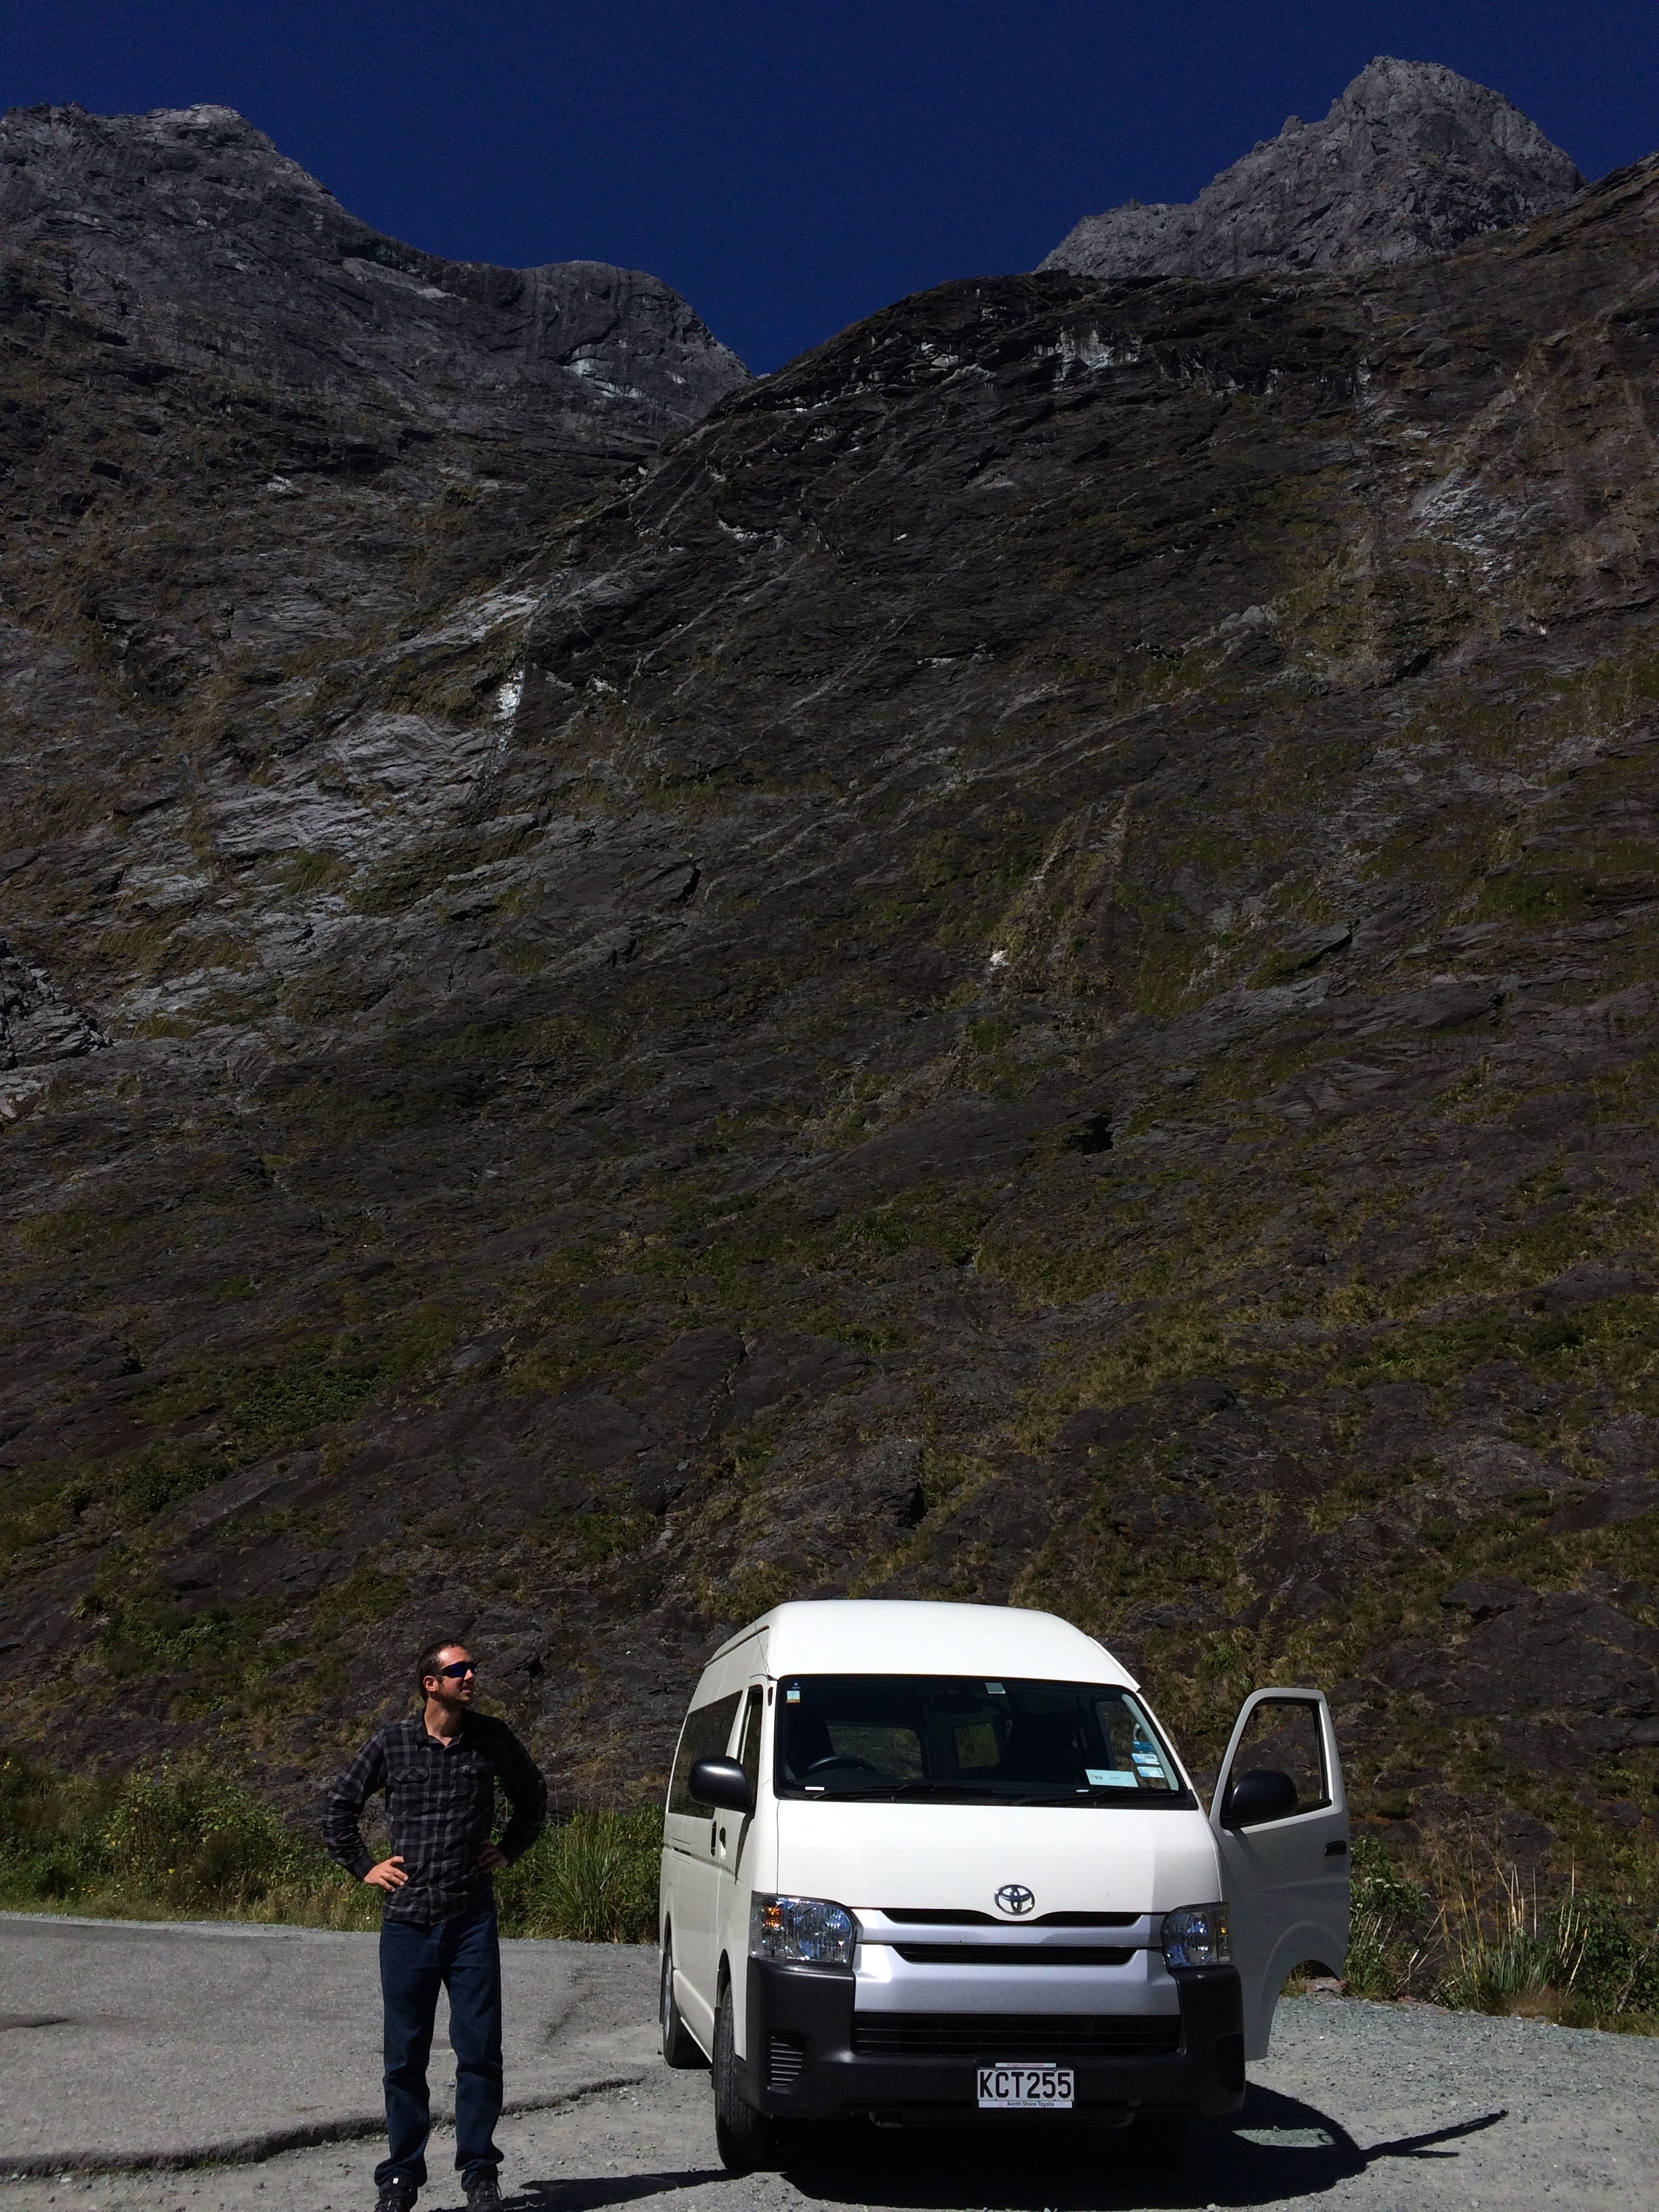 Road to Milford Sound - South Island, New Zealand